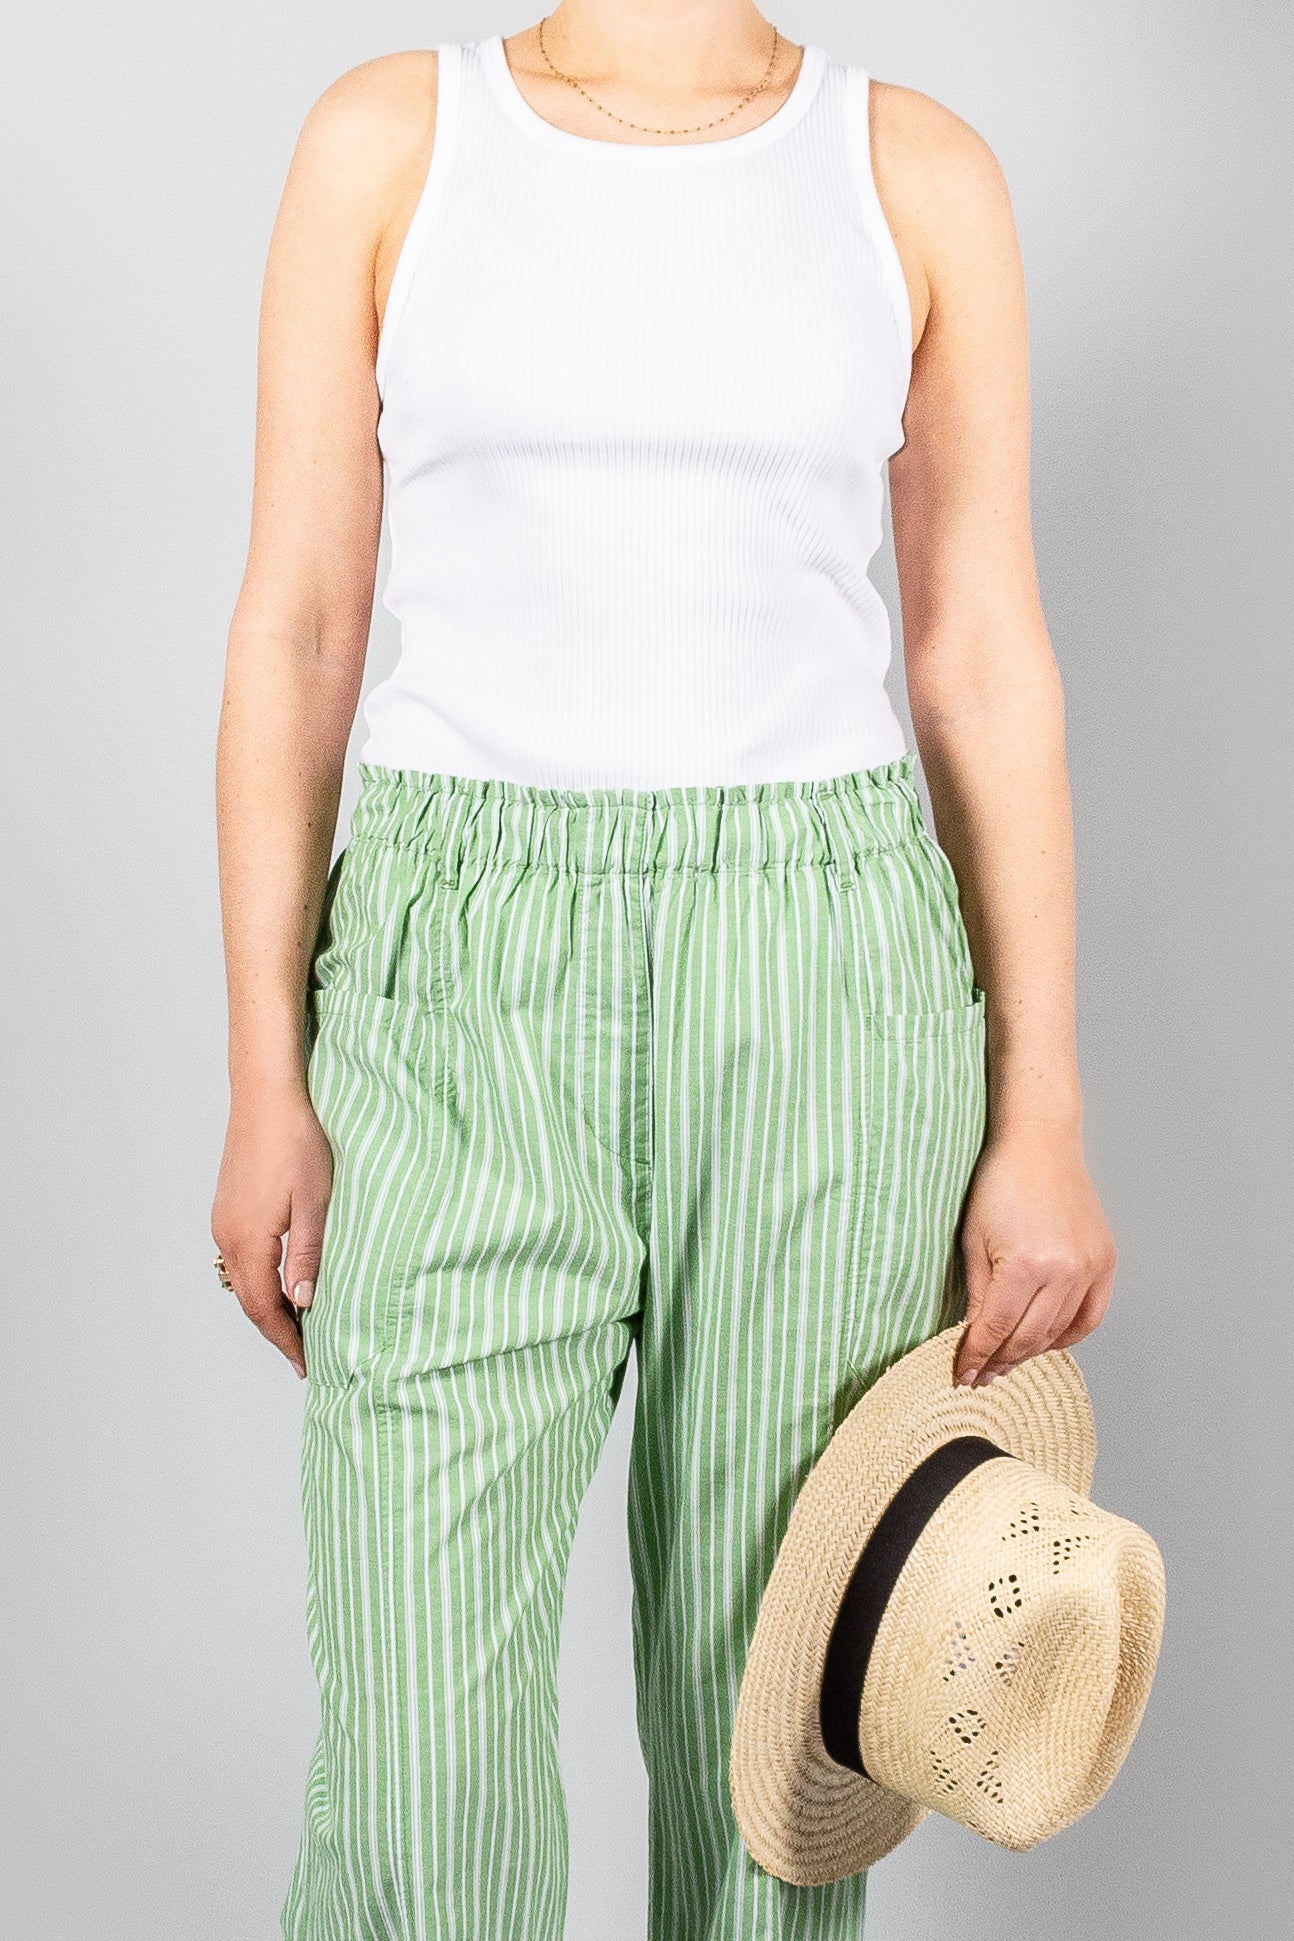 Xirena Jake Pant-Pants and Shorts-Misch-Boutique-Vancouver-Canada-misch.ca